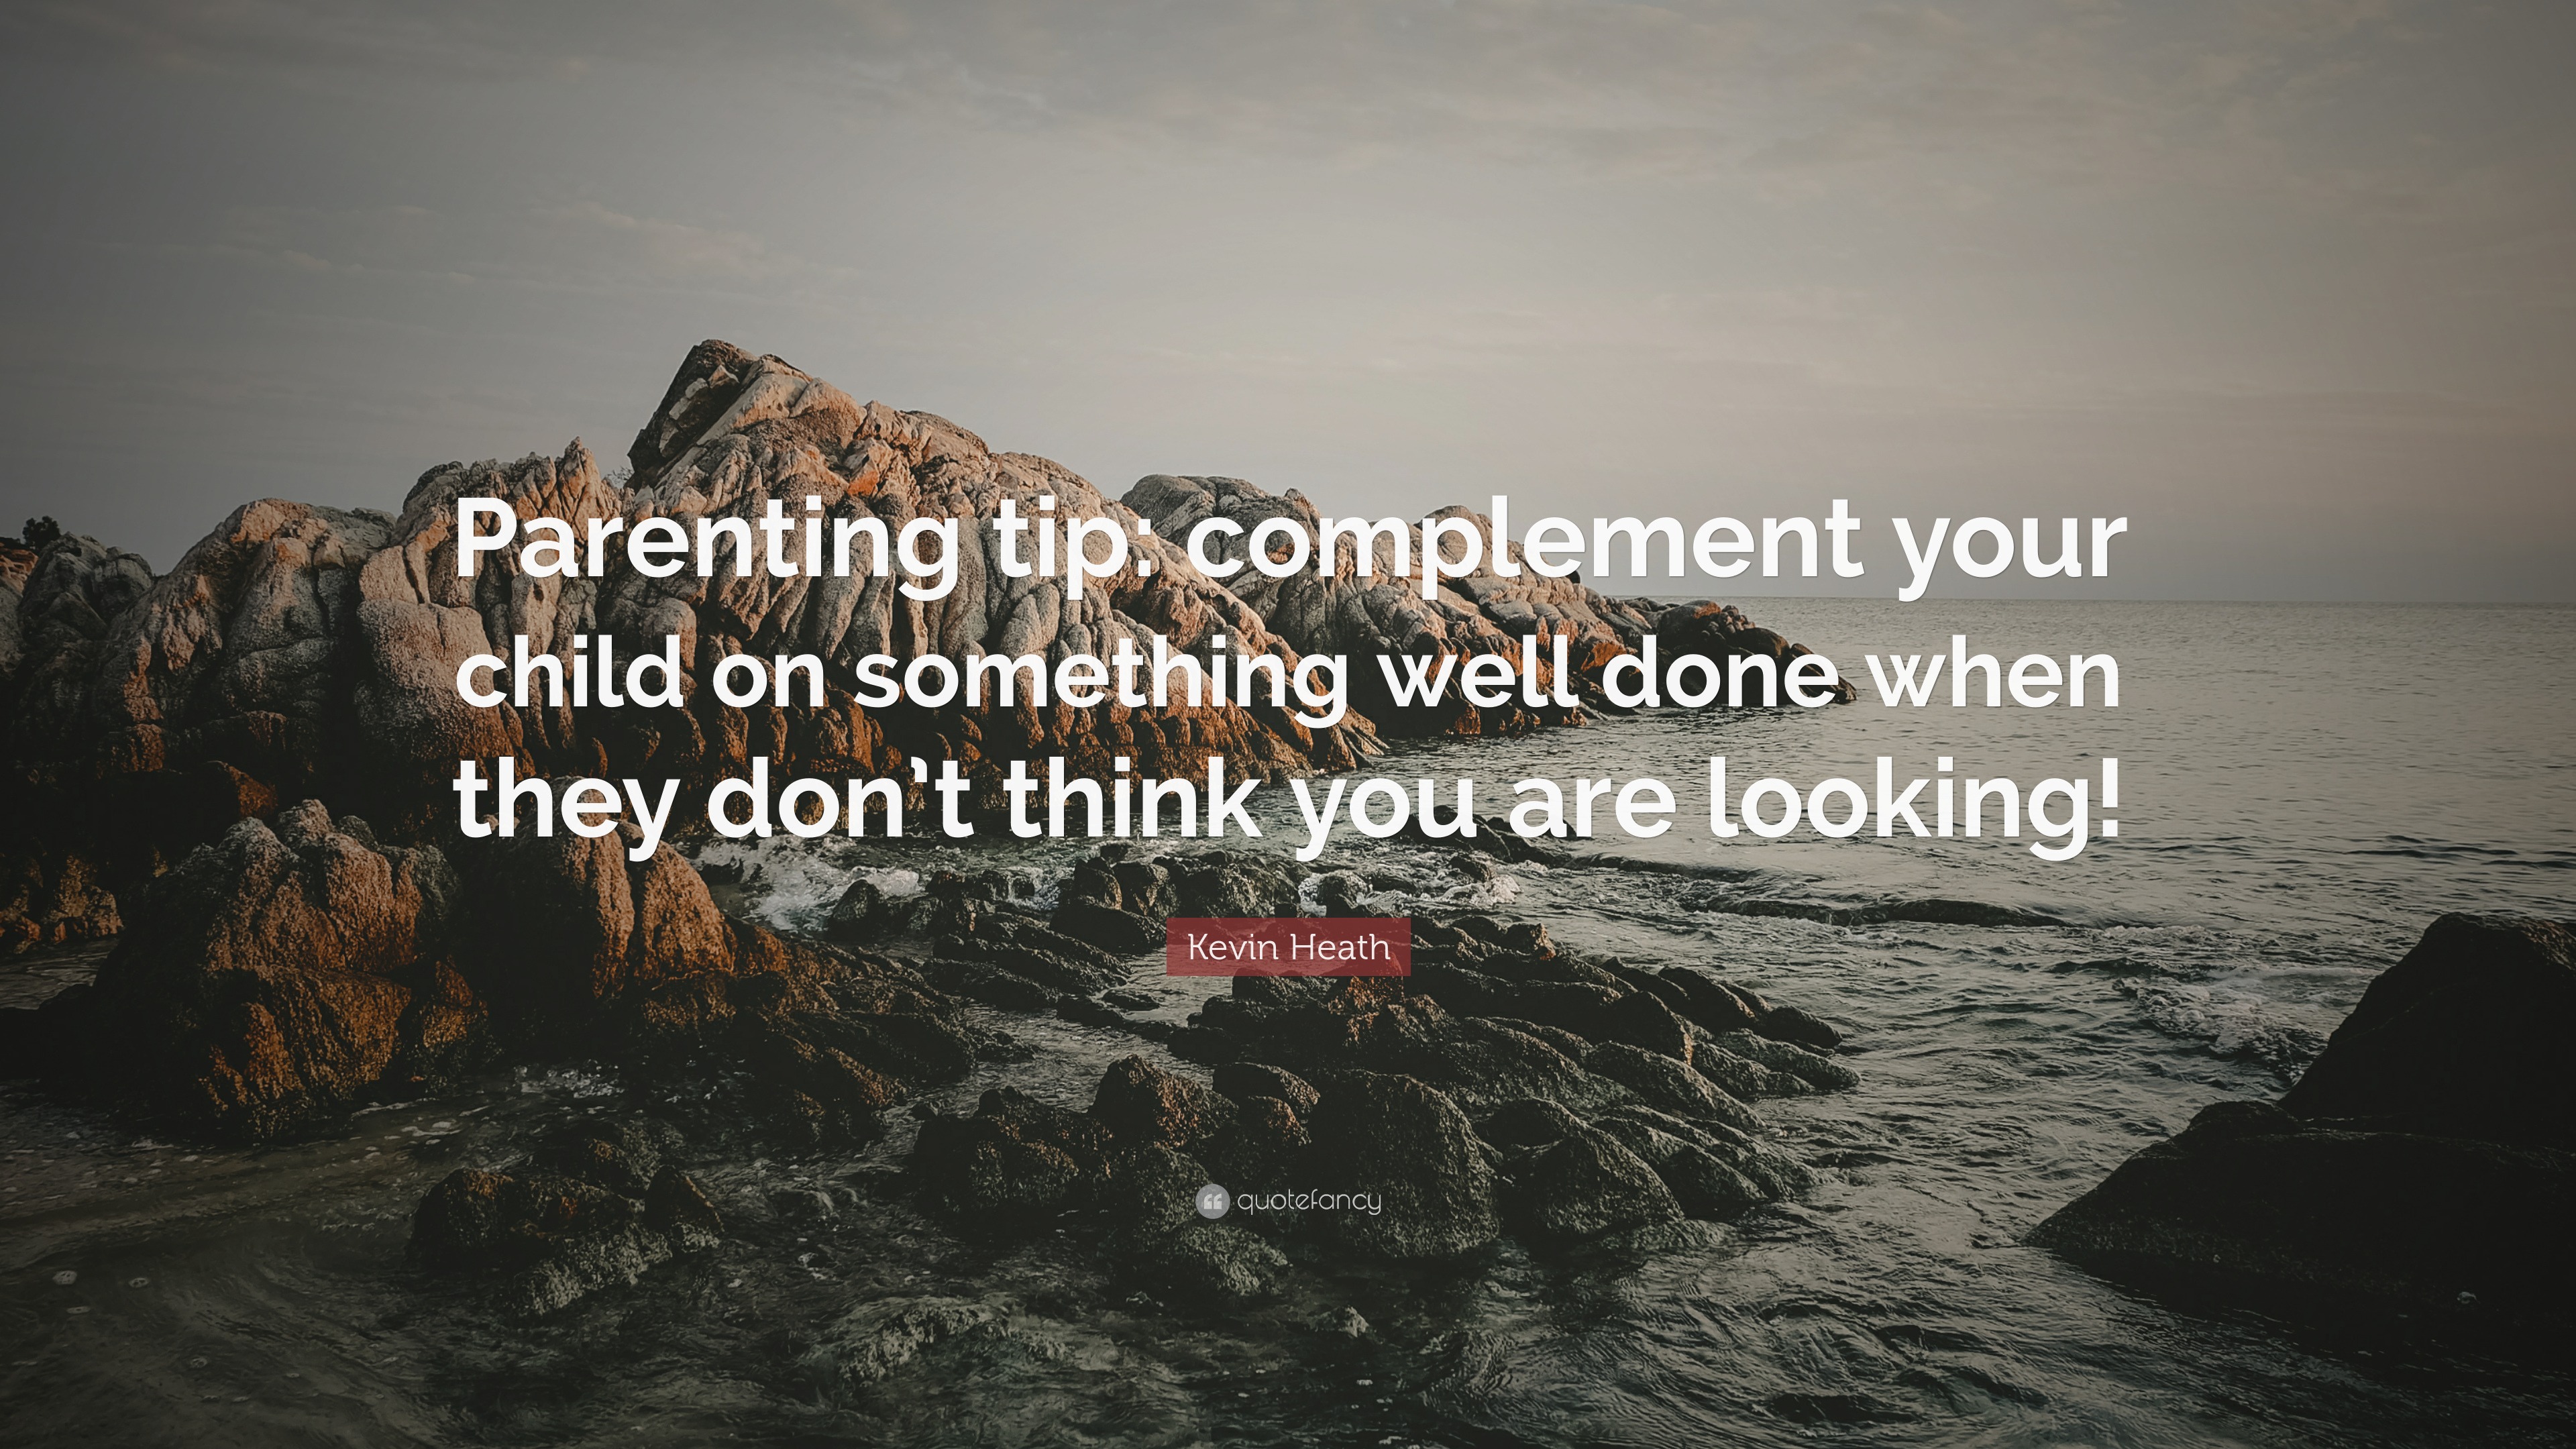 https://quotefancy.com/media/wallpaper/3840x2160/4619642-Kevin-Heath-Quote-Parenting-tip-complement-your-child-on-something.jpg